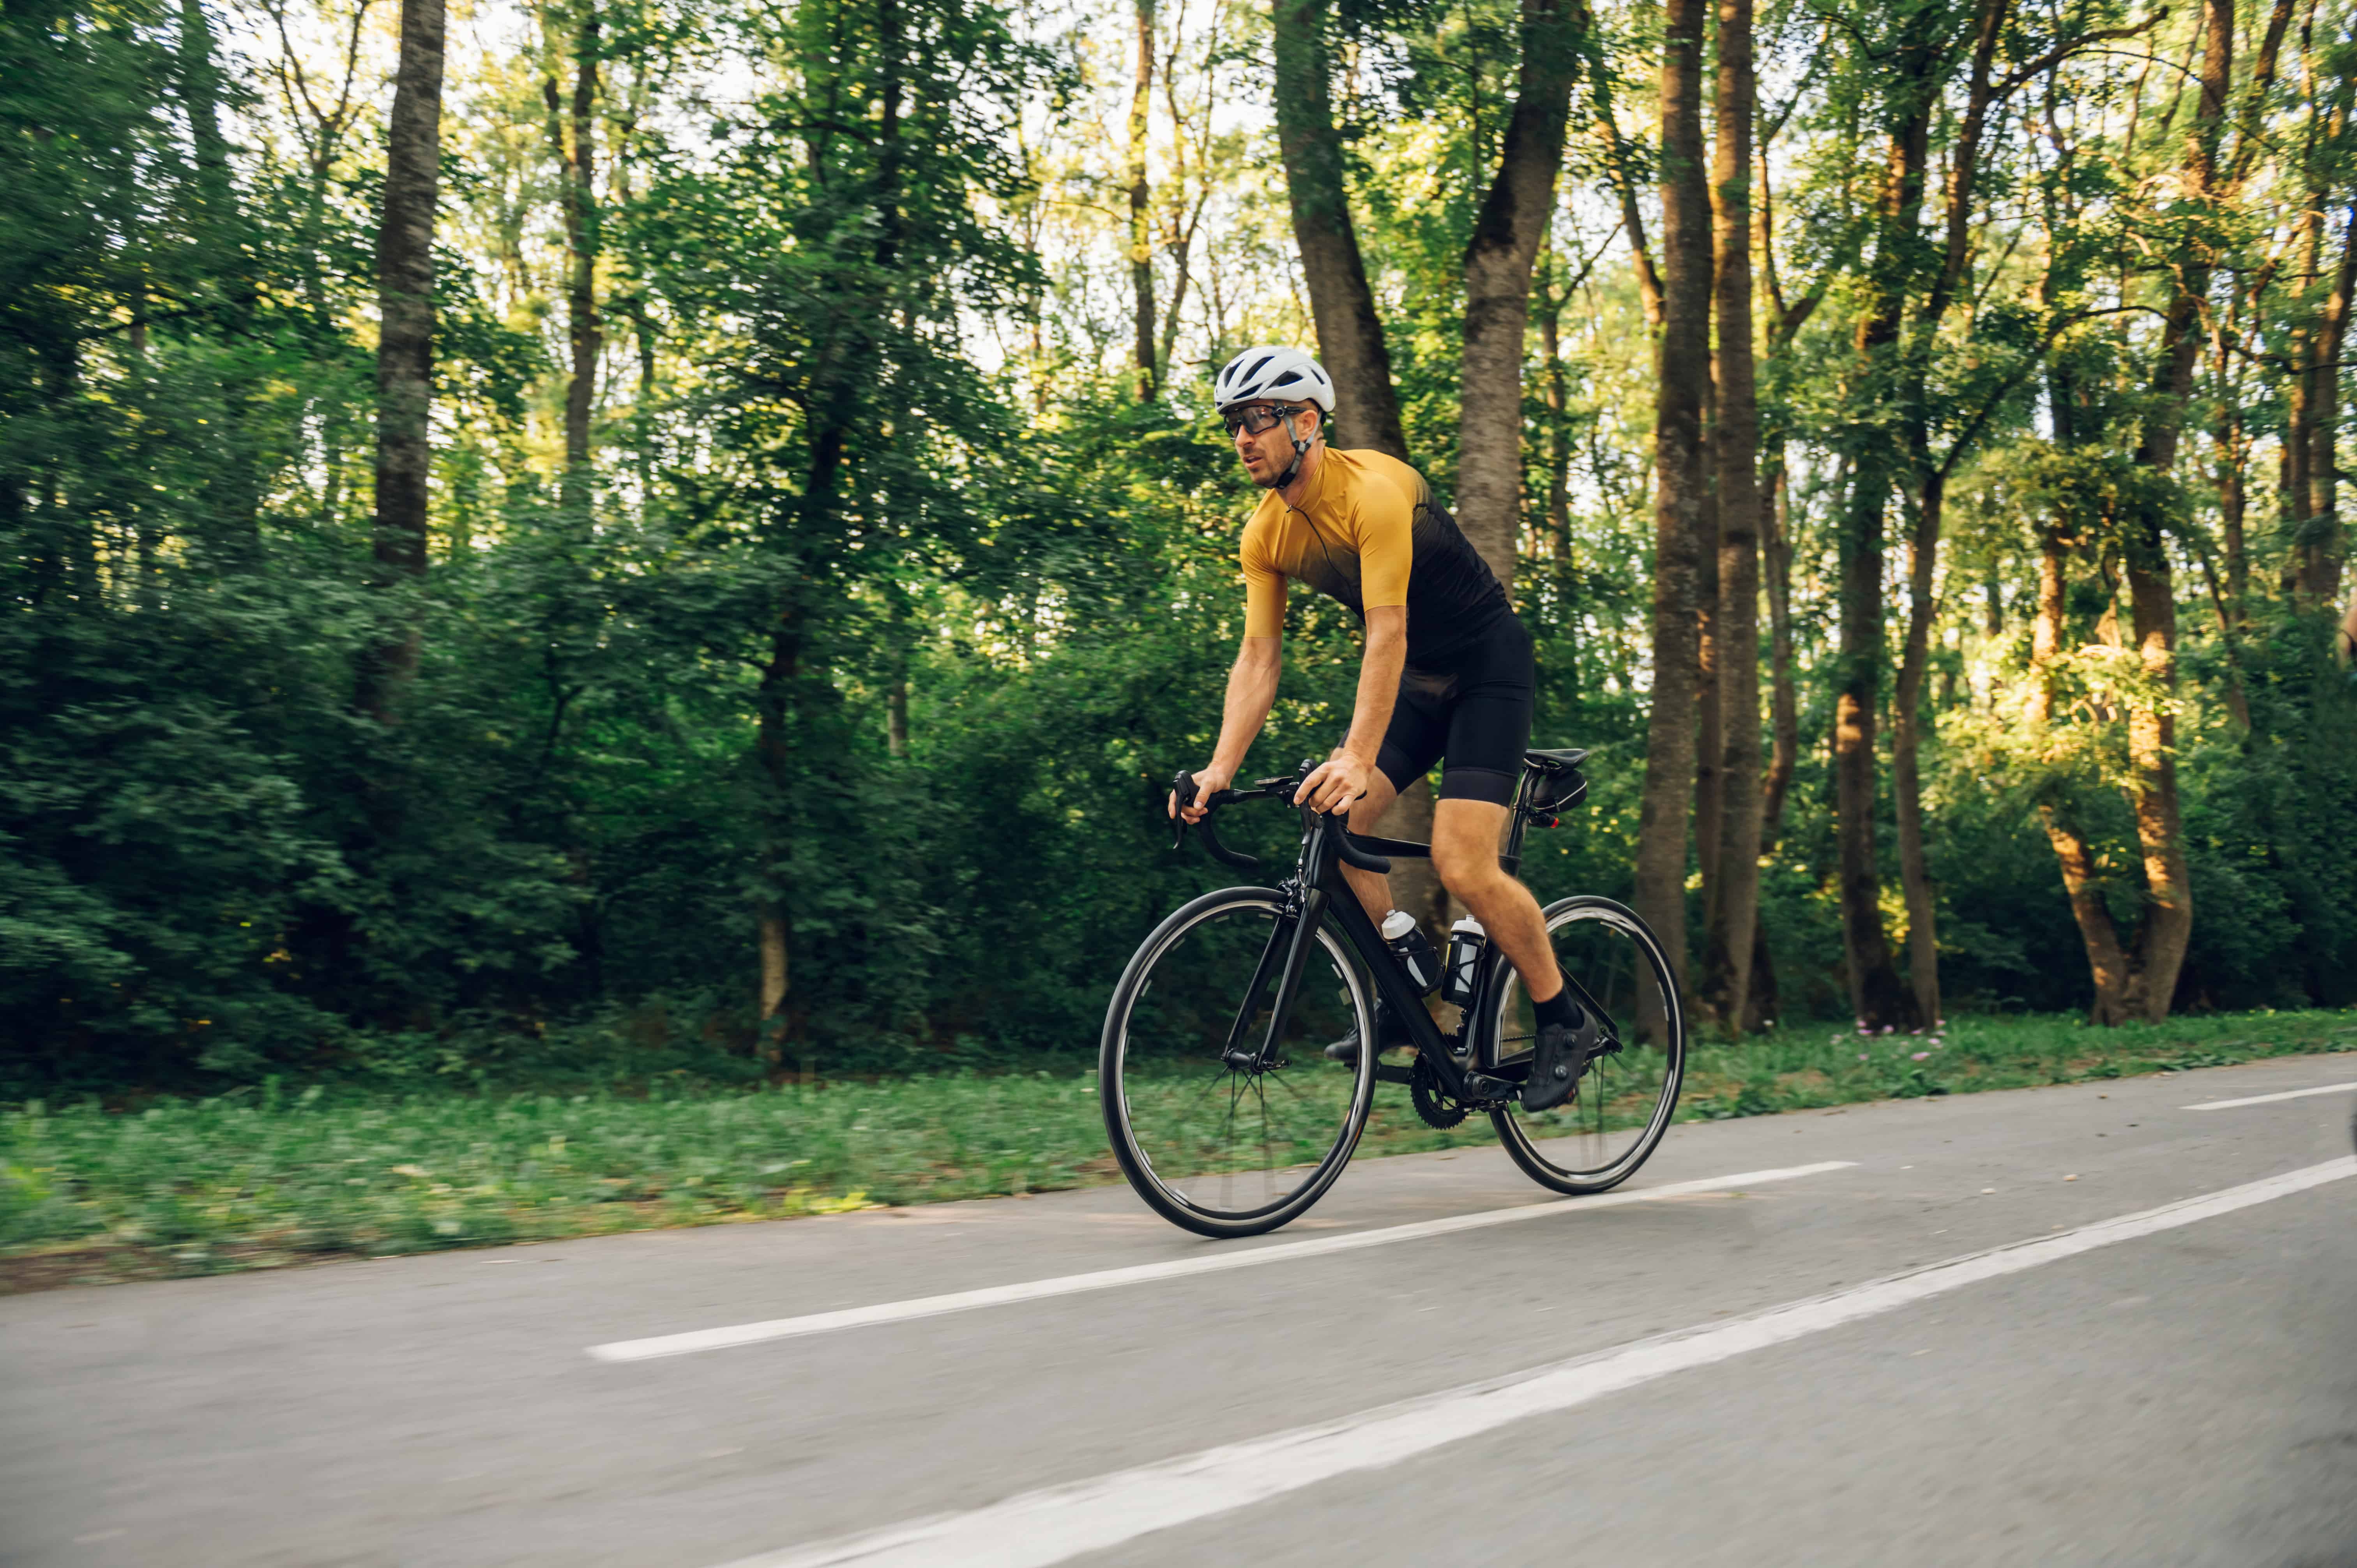 Athletic man in sport clothes riding a bike in the nature